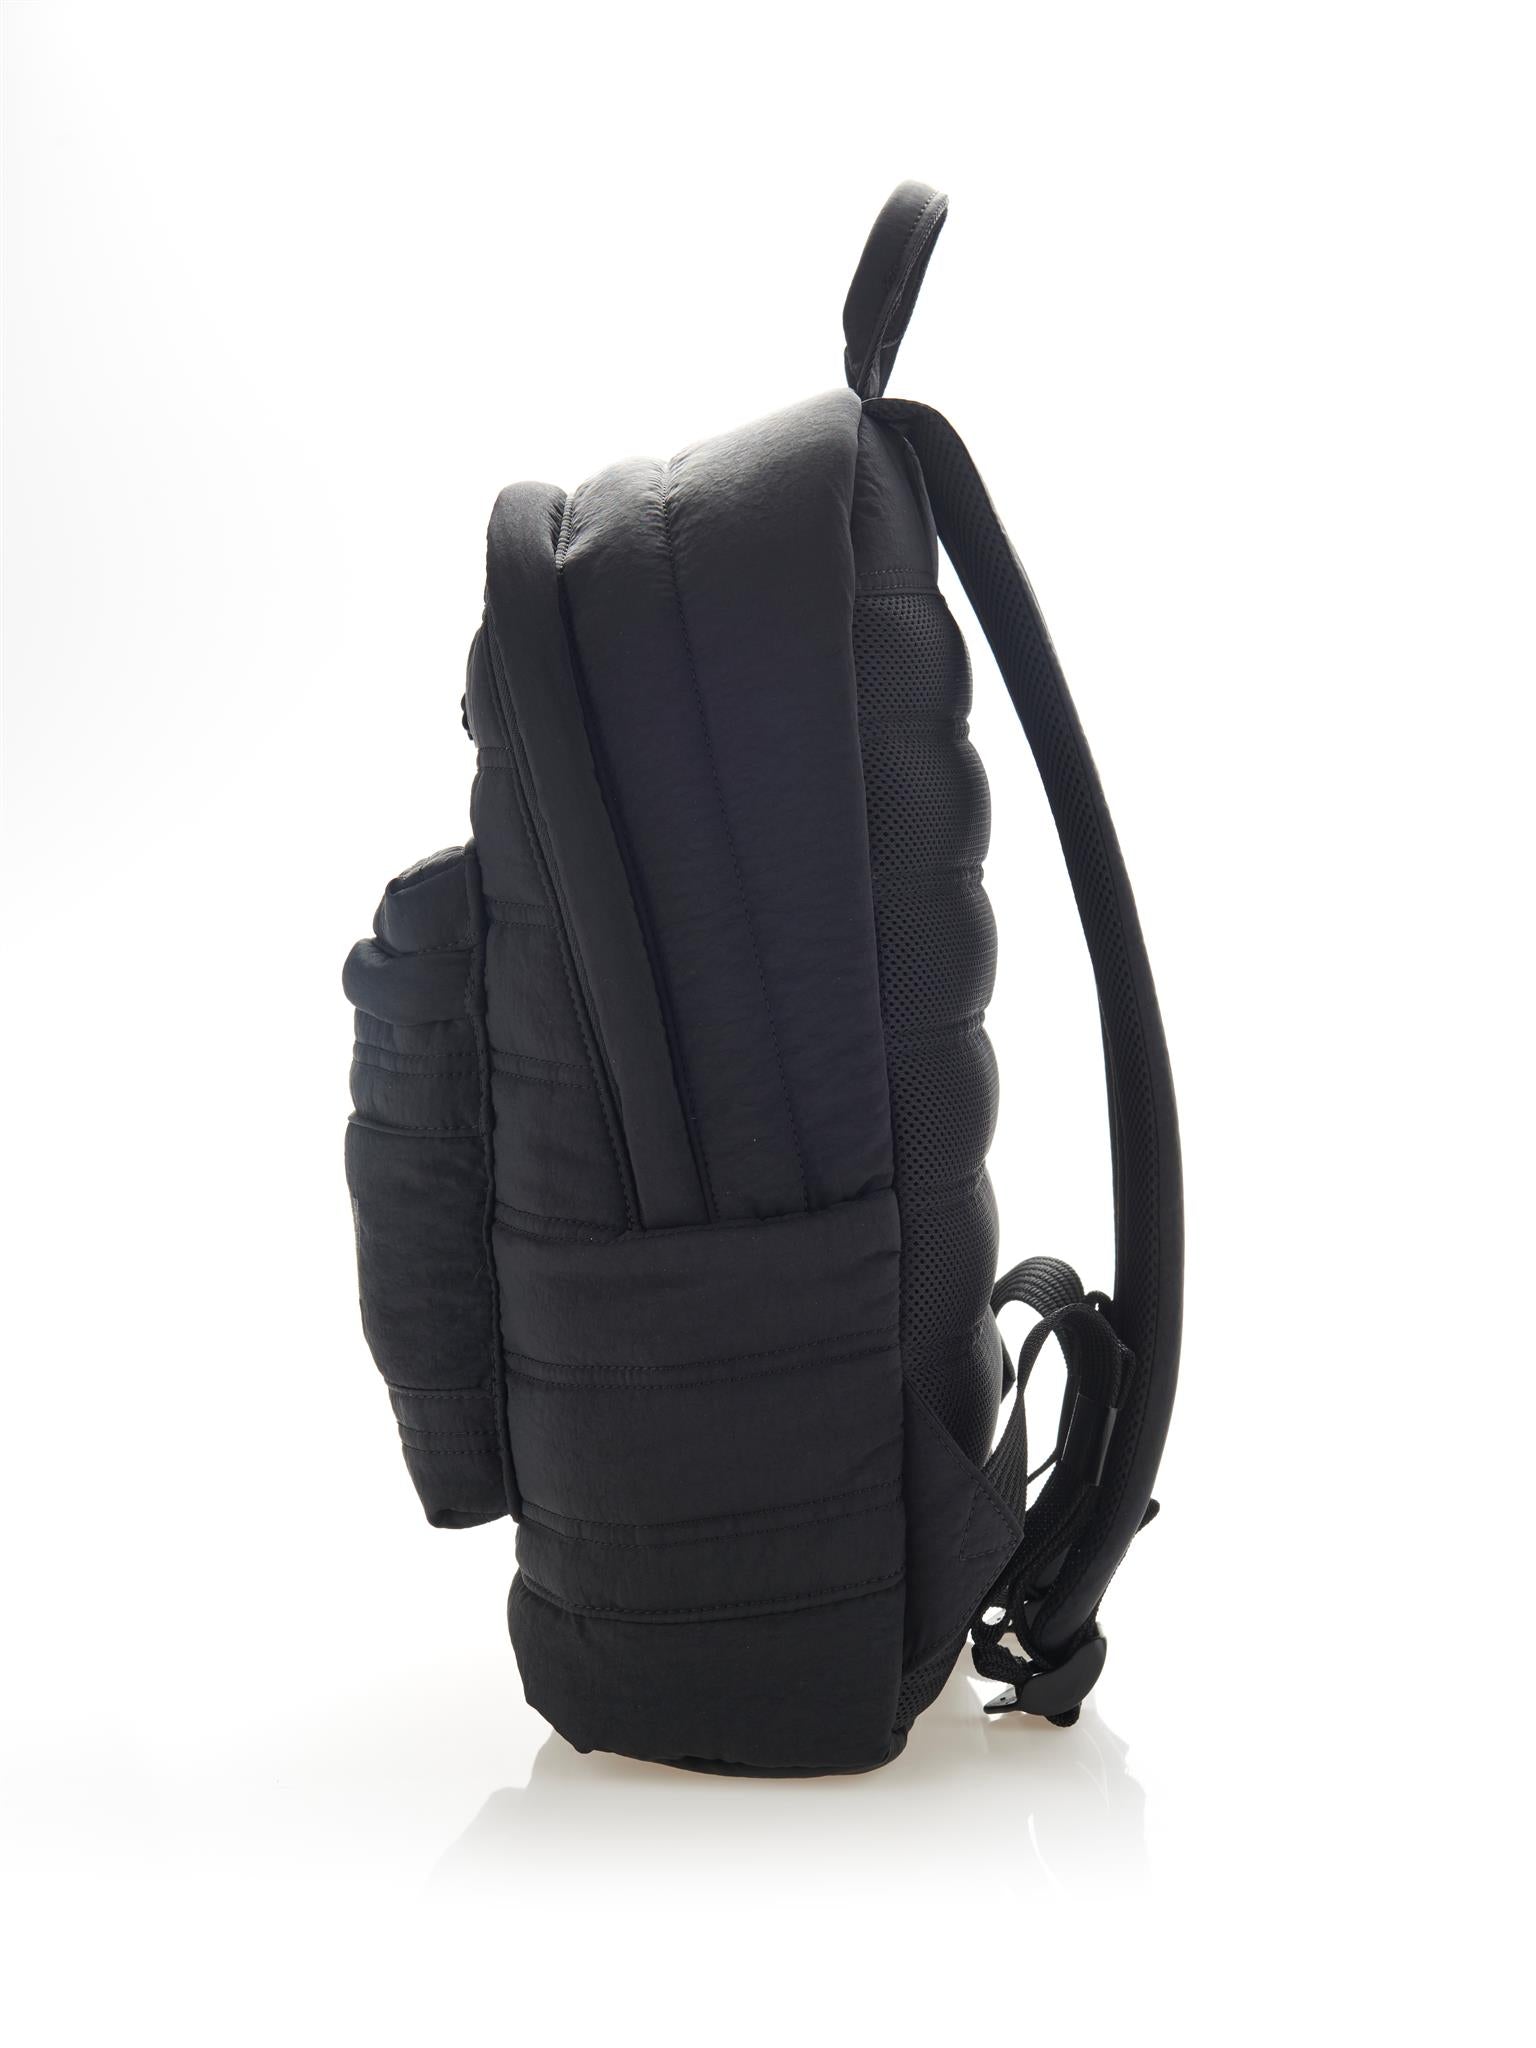 Mueslii original puffer laptop backpack made of high density nylon and Ykk zips, color matte black, side view.